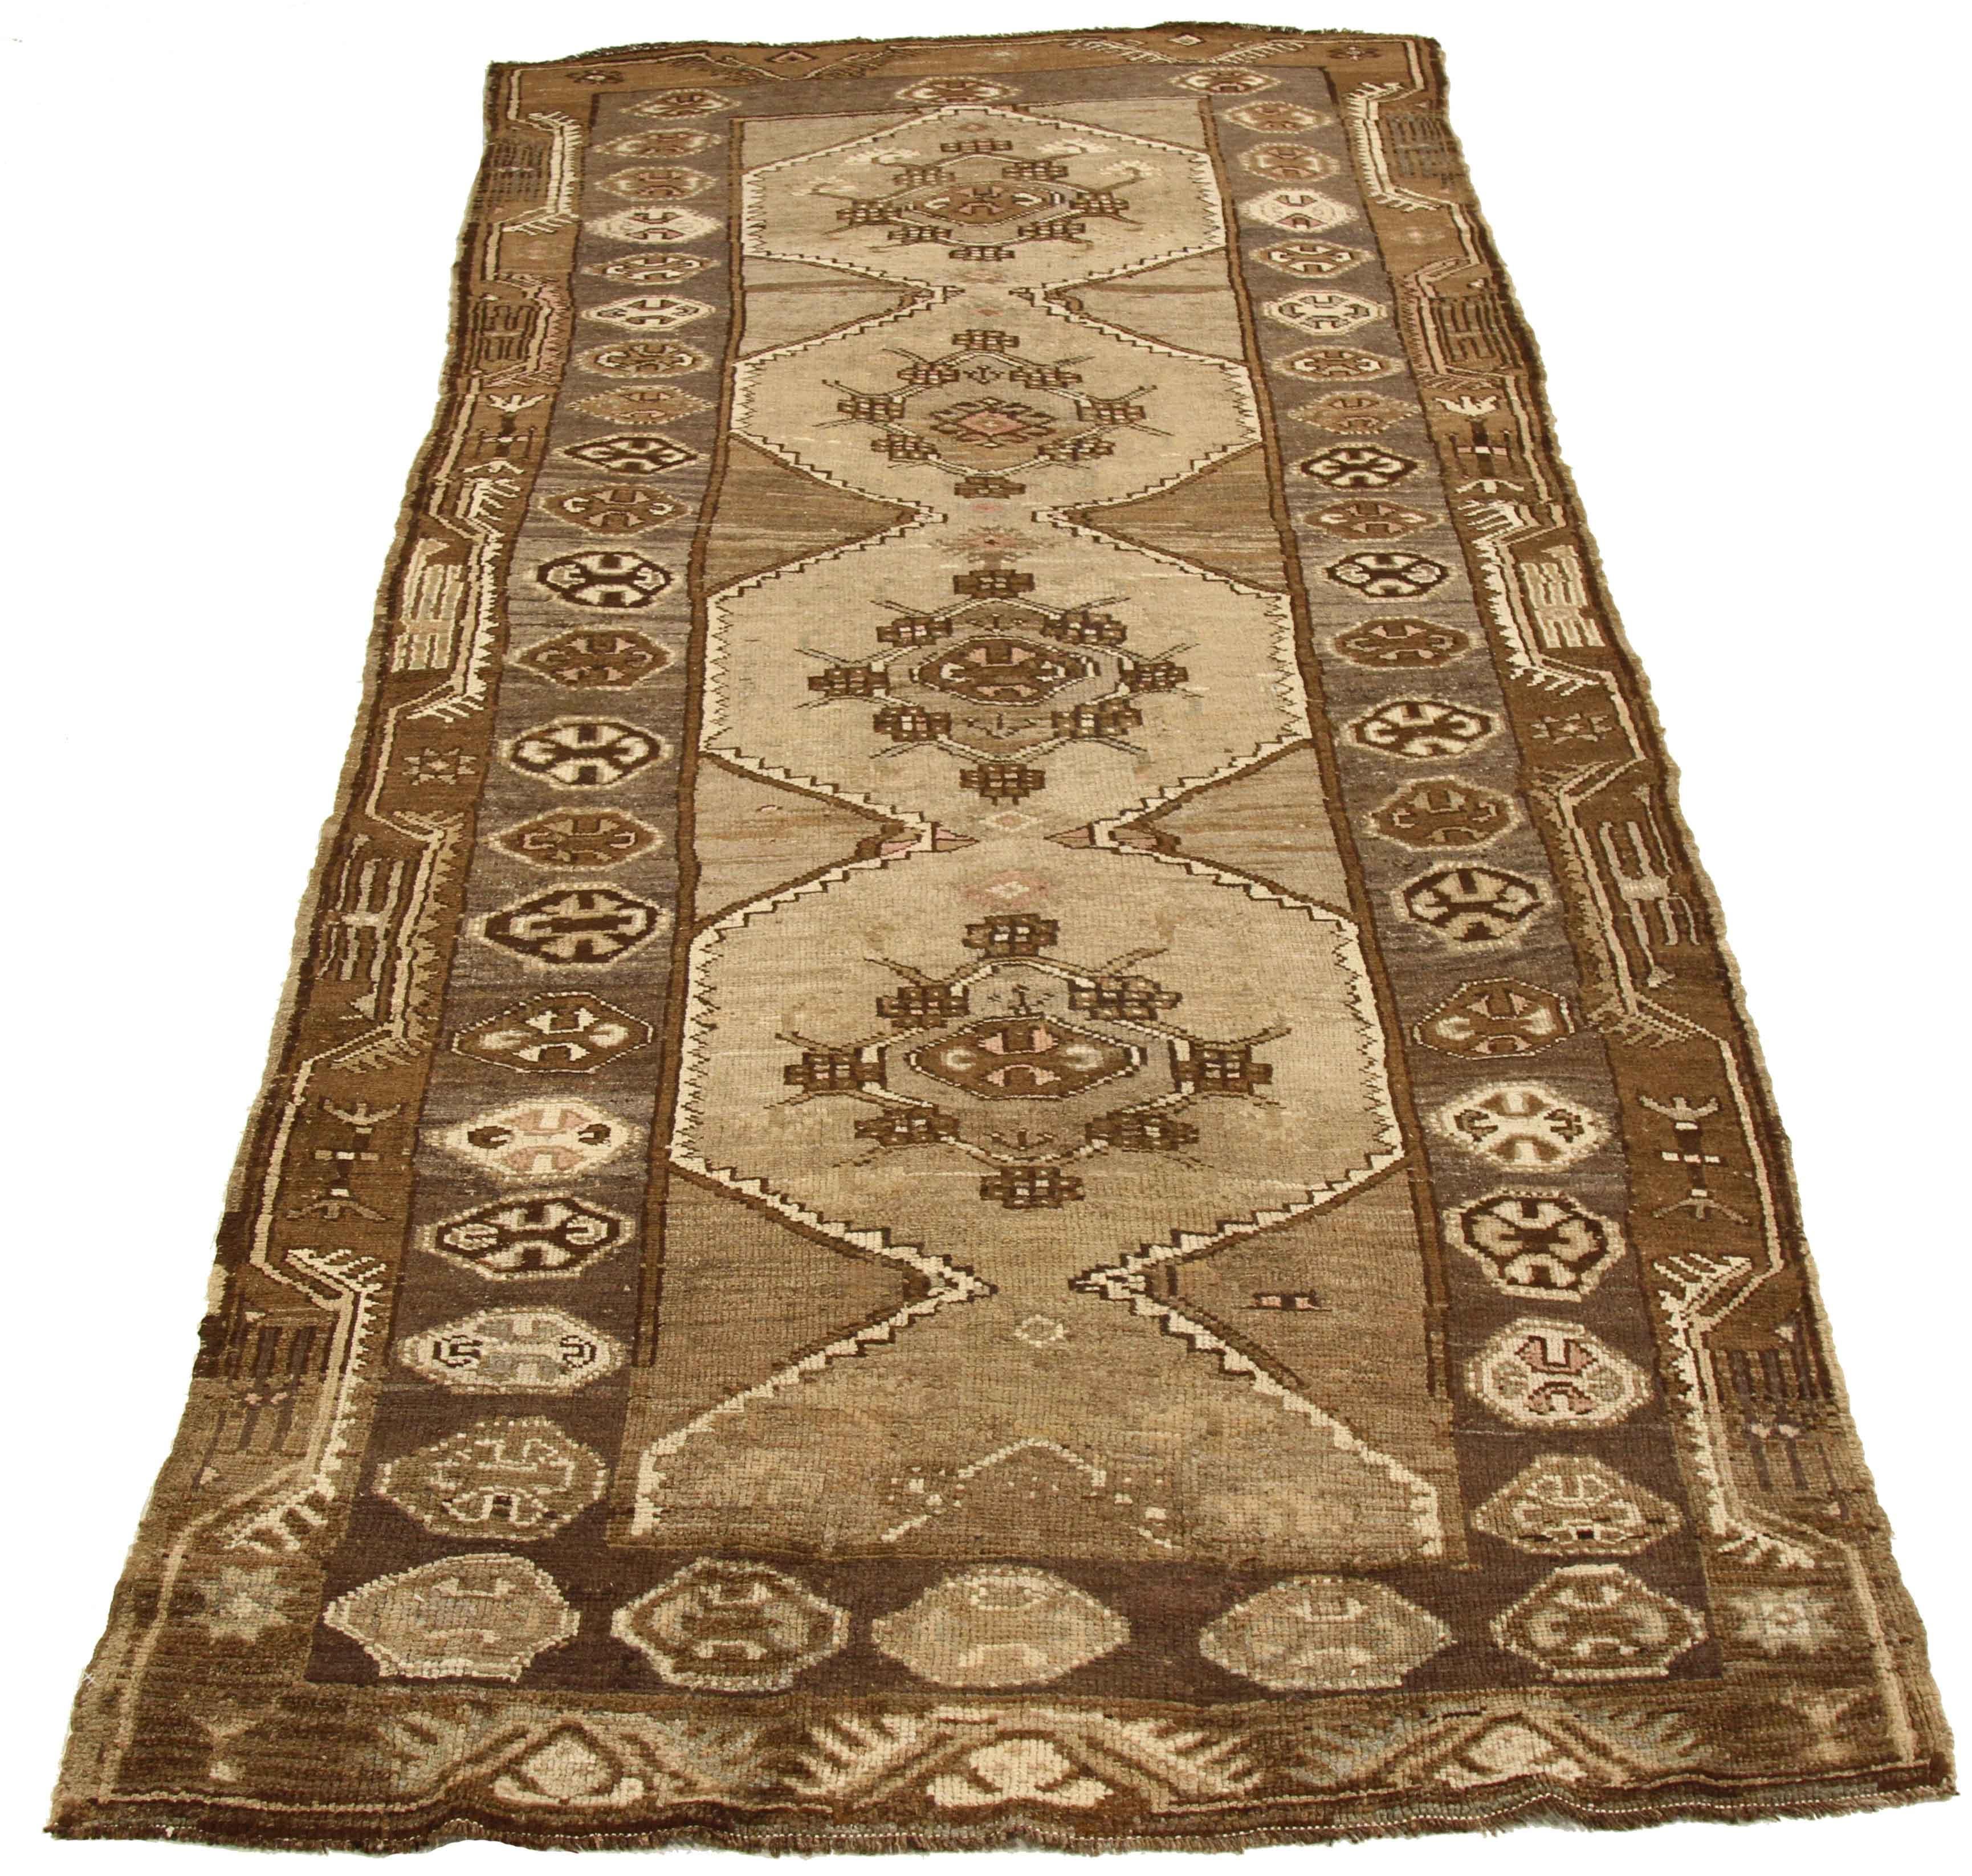 Hand-Knotted Antique Persian Rug Azerbaijan Design with Traditional Gul Motif, circa 1900s For Sale